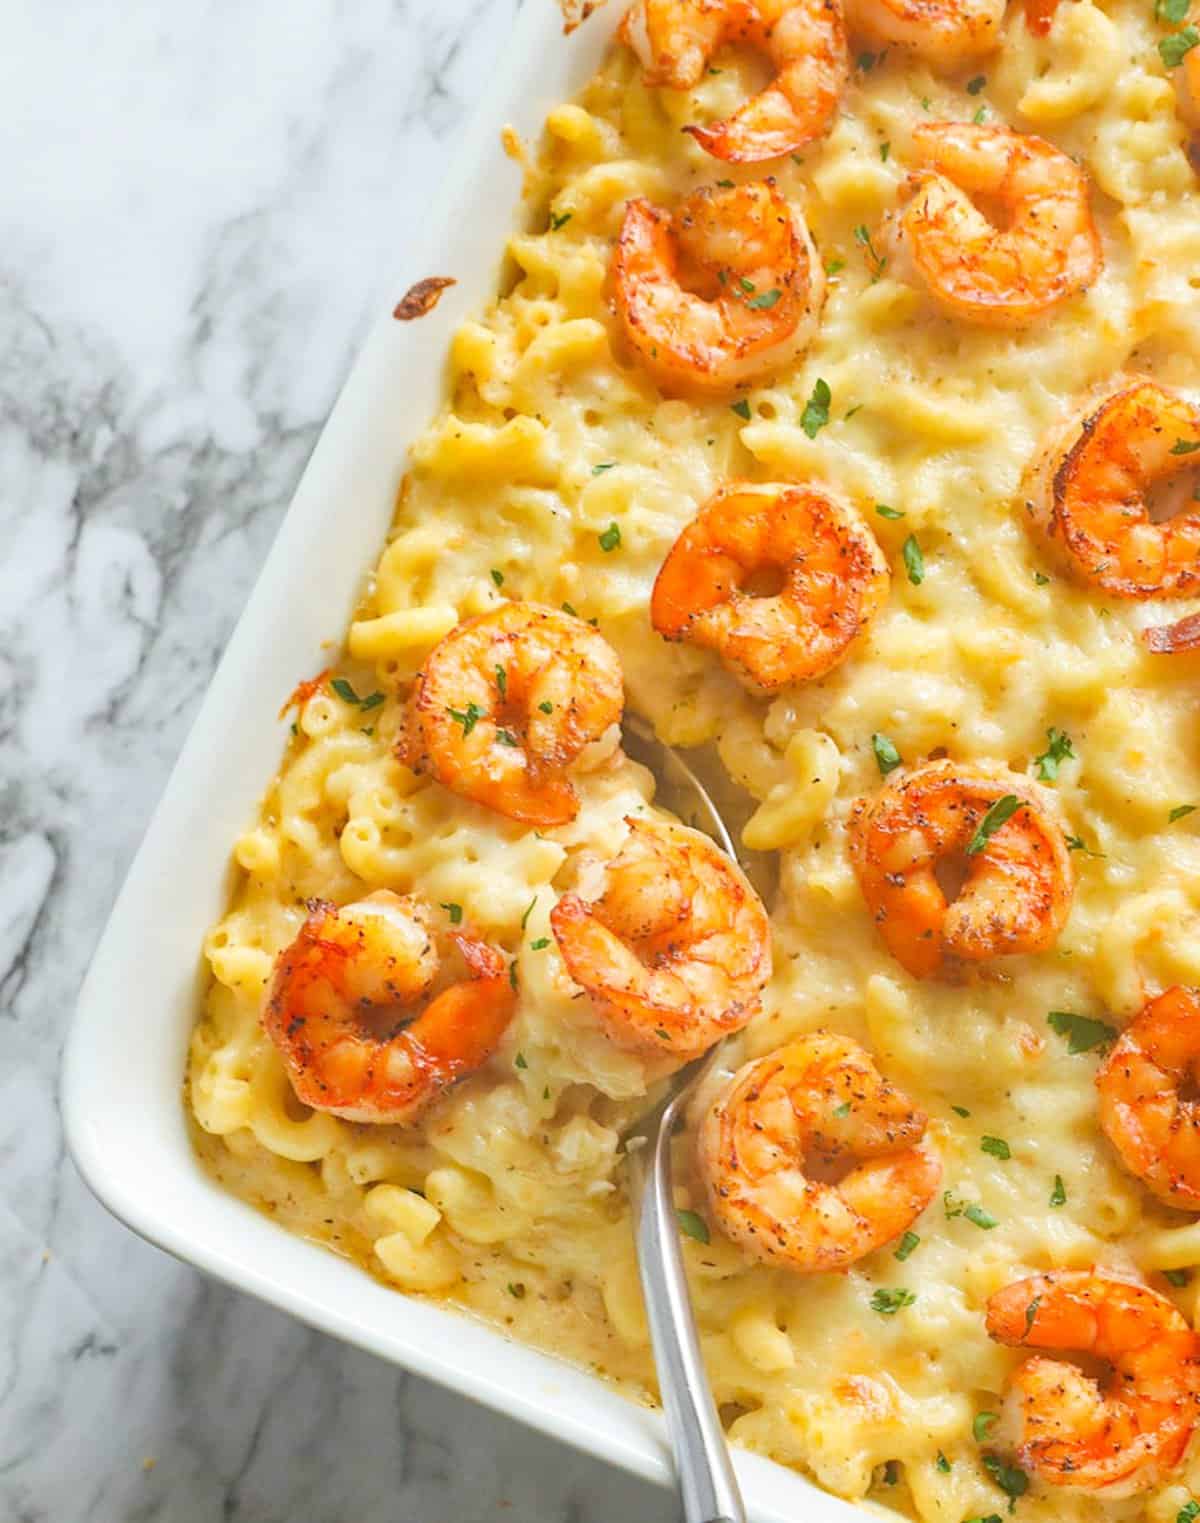 Diving into insanely delicious mac and cheese with shrimp